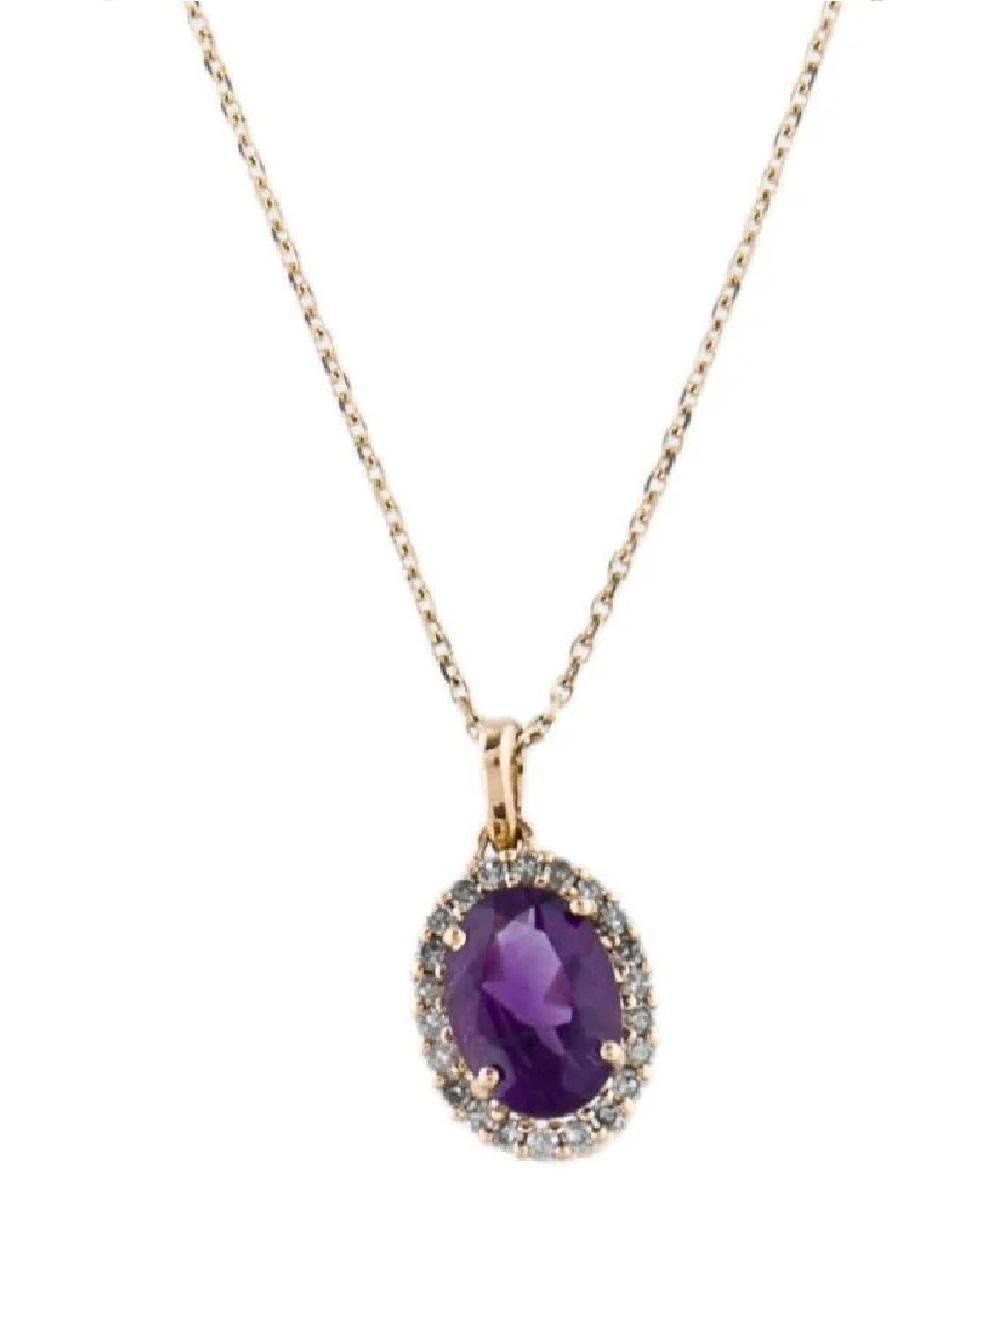 14K Amethyst Diamond Pendant Necklace - Vintage Style Jewelry, Statement Piece In New Condition For Sale In Holtsville, NY